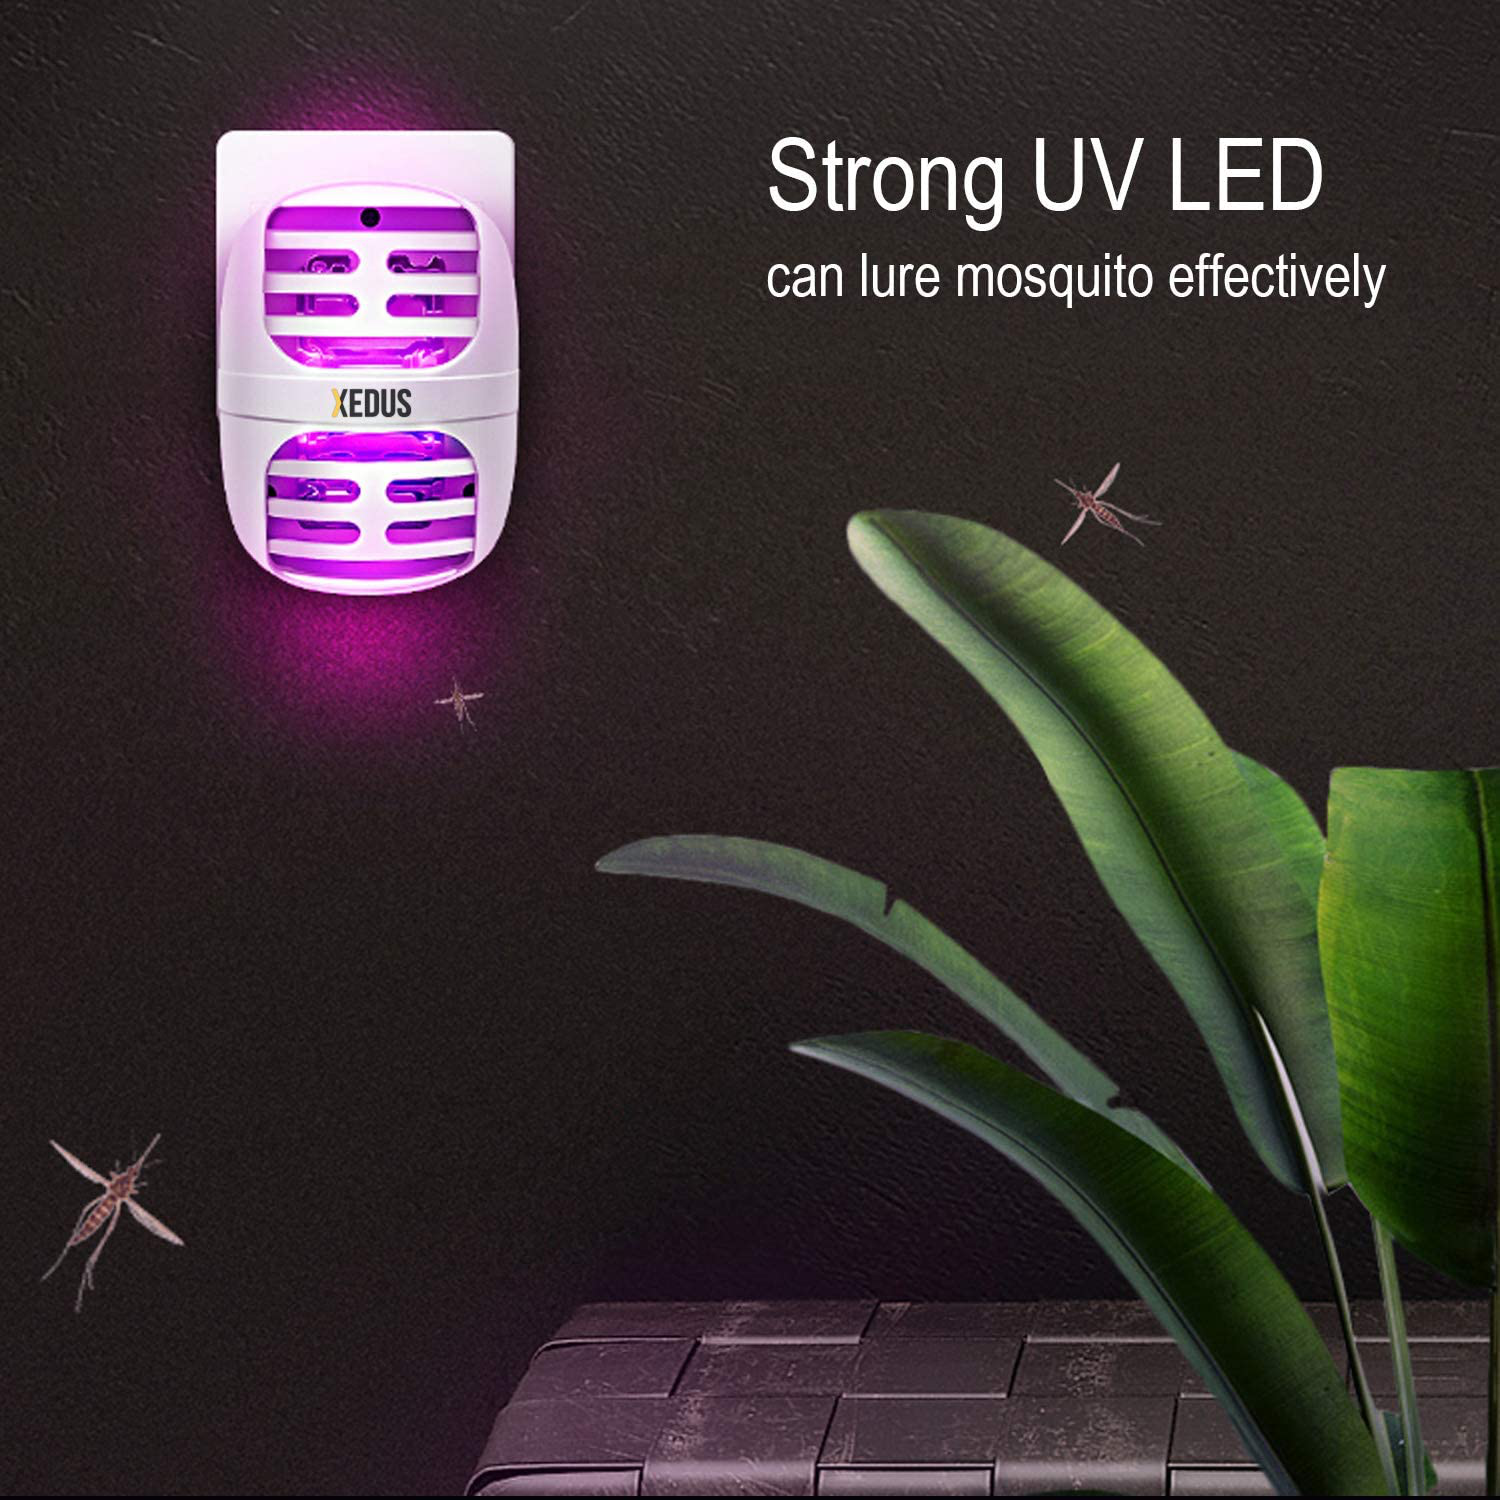 Bug Zapper Indoor Plug-in - Mosquito Killer lamp Insect Trap - Electric Insect Repellent - Pest Control for Bedroom, Kitchen, Office, Home